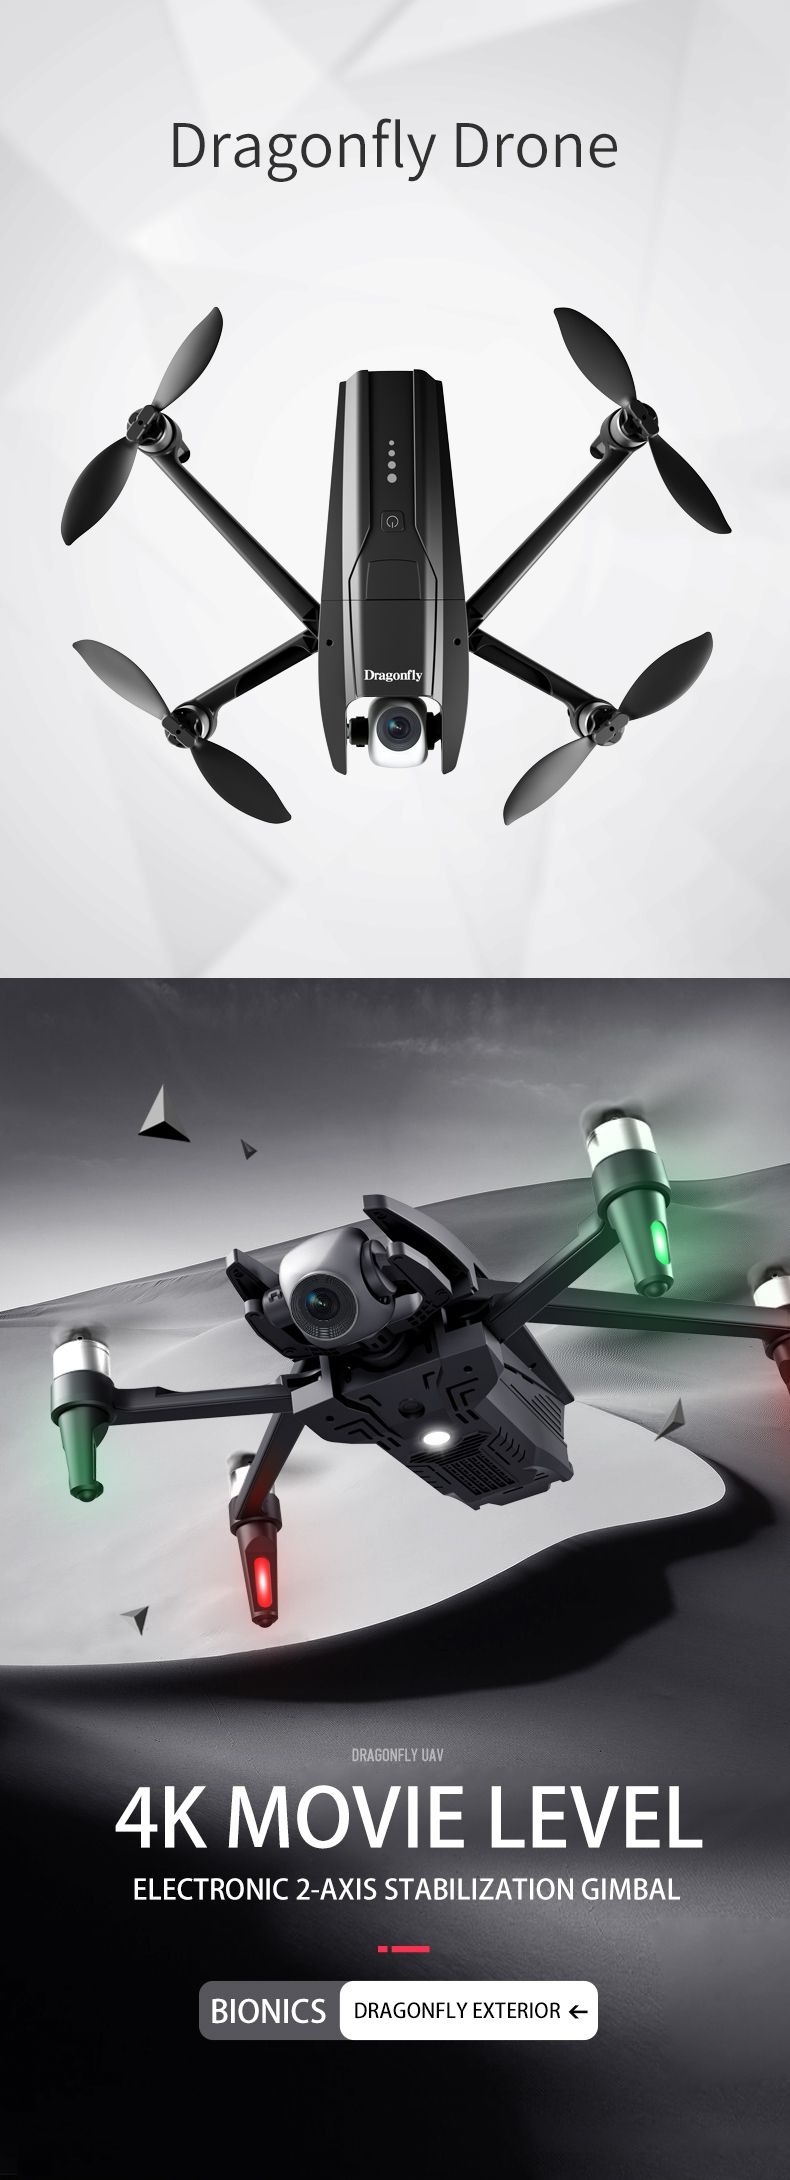 JJRC X15 Dragonfly GPS WiFi FPV with 4K HD Camera 2-axis Gimbal Optical Flow Brushless RC Drone Quadcopter RTF